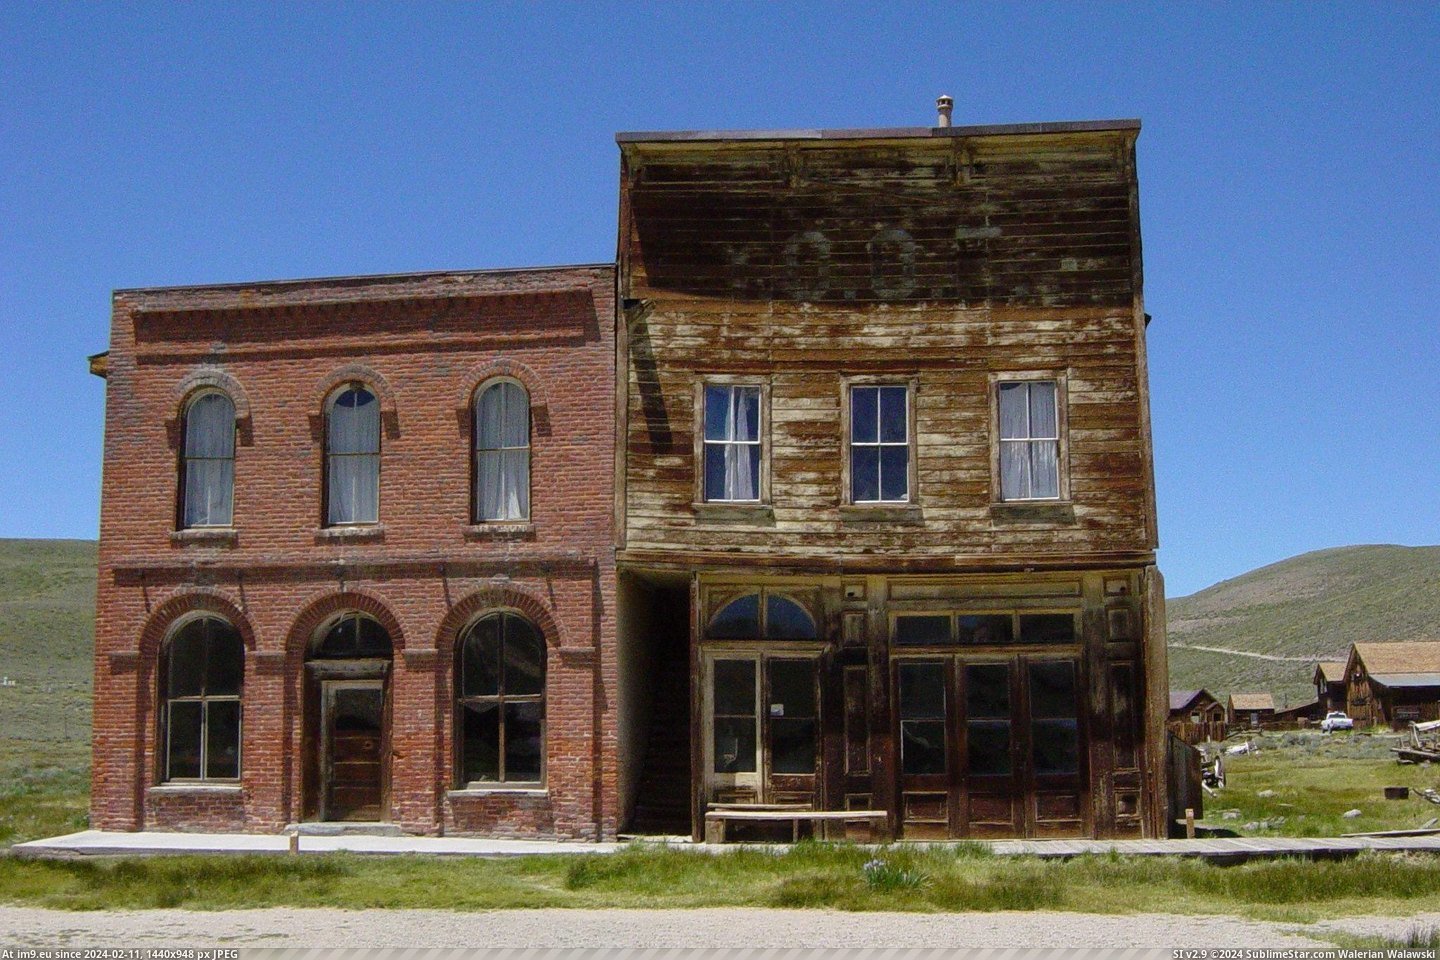 #California #Office #Ioof #Hall #Bodie Ioof Hall And Post Office In Bodie, California Pic. (Obraz z album Bodie - a ghost town in Eastern California))